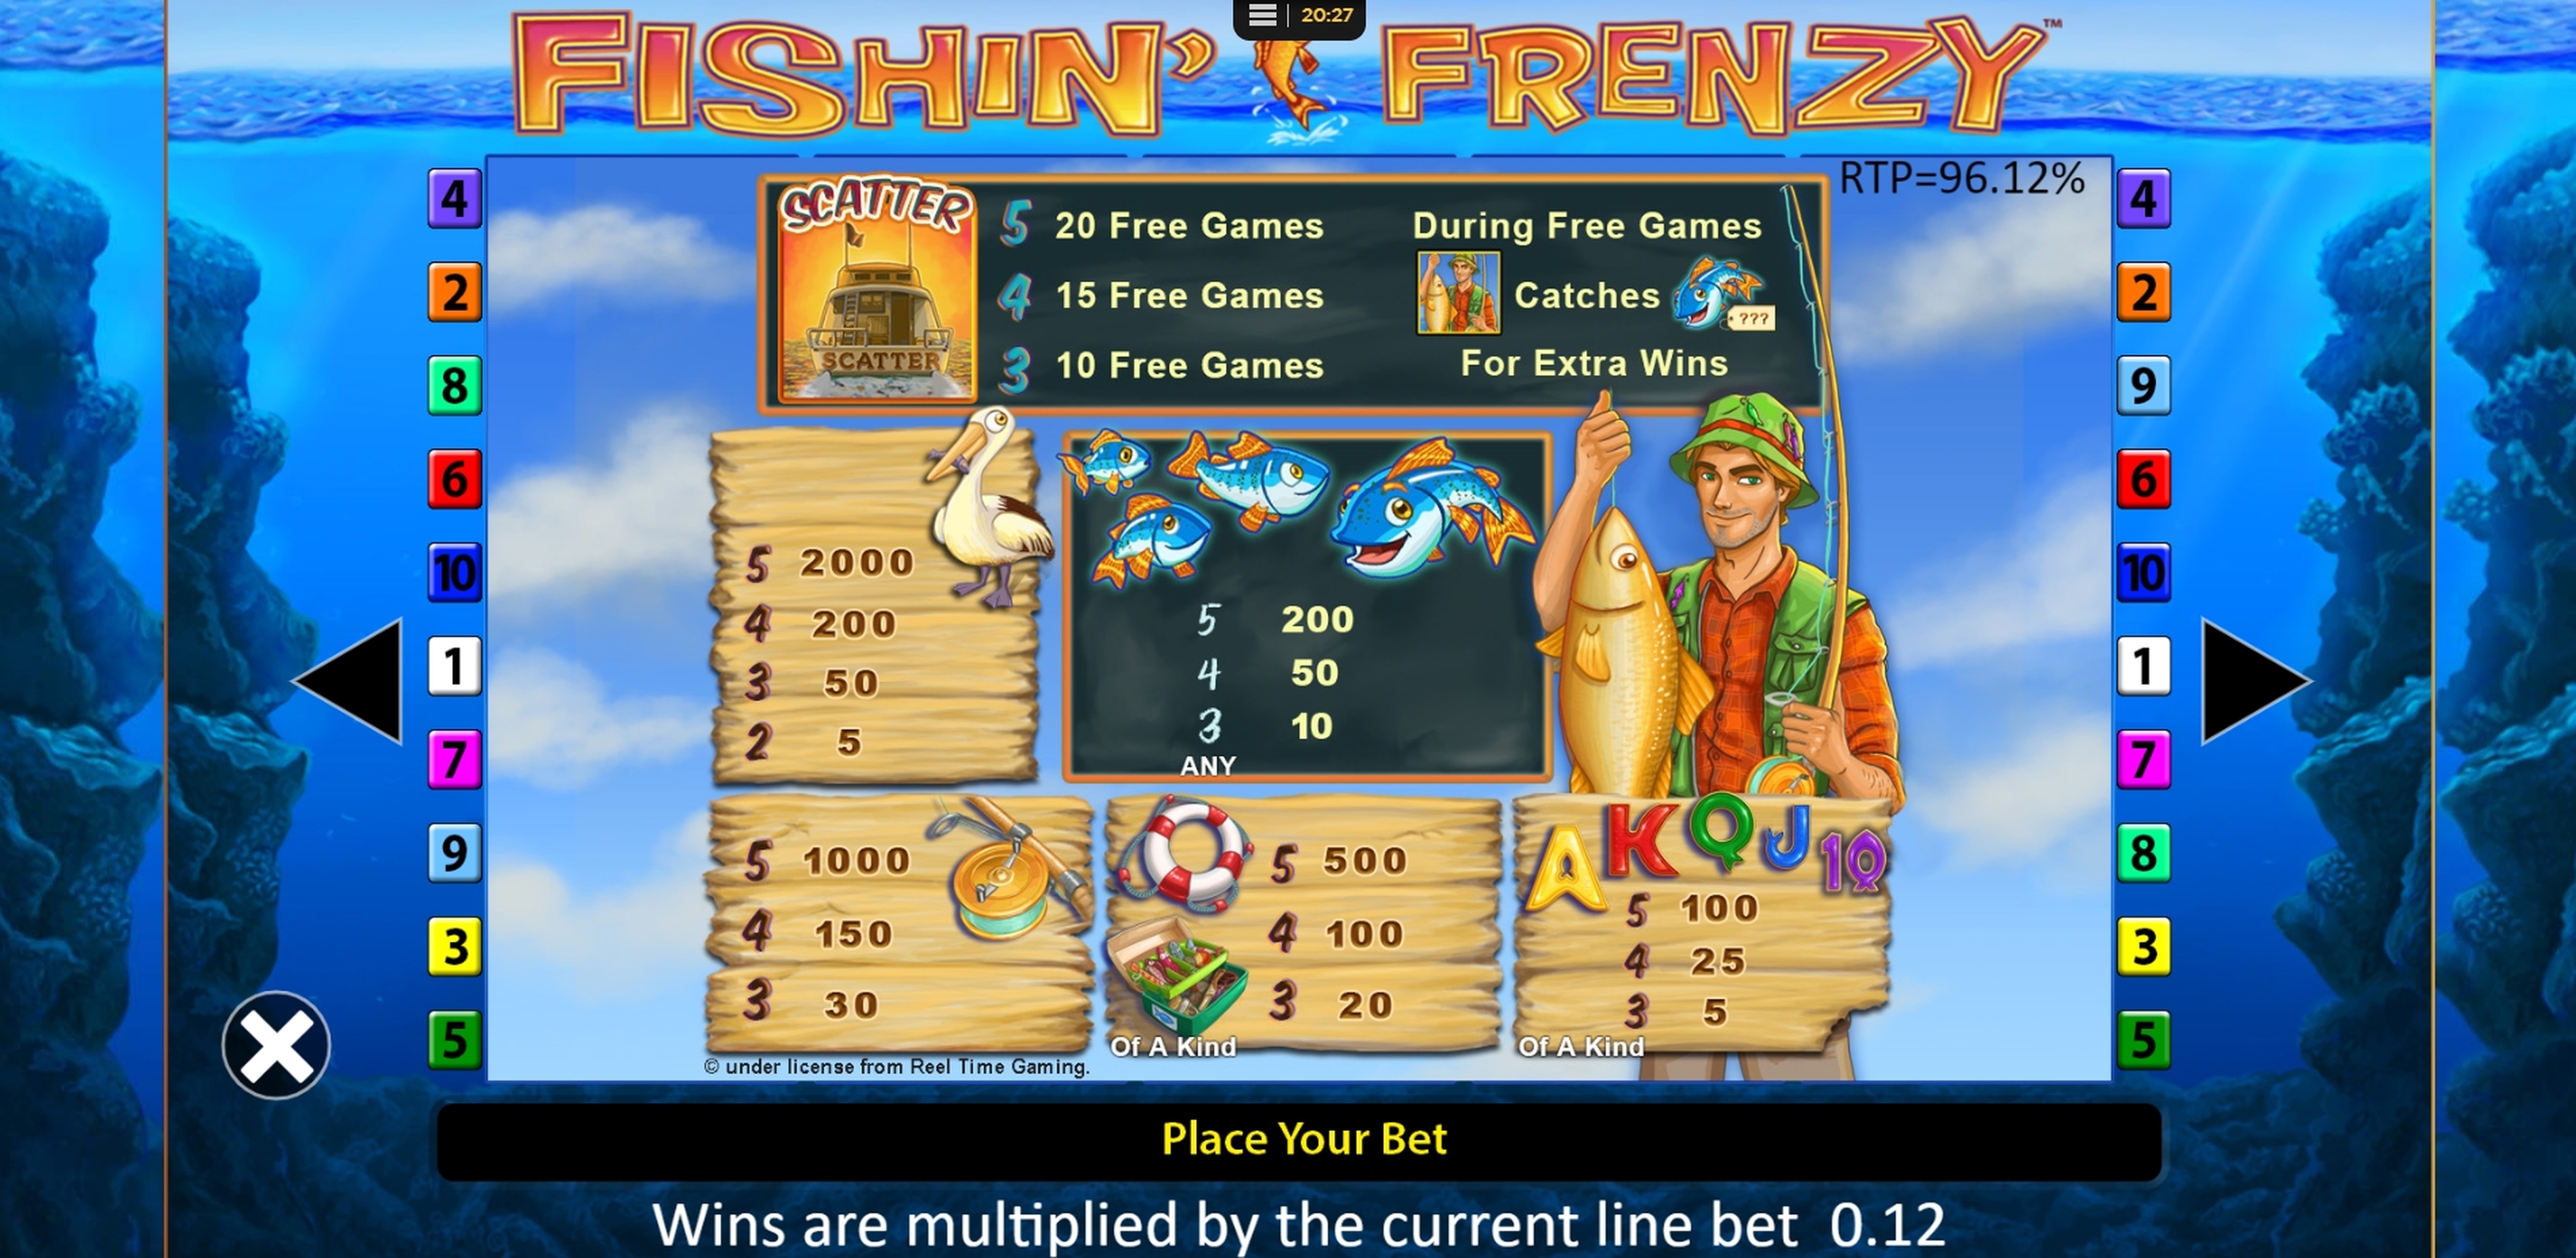 Info of Fishin' Frenzy Slot Game by Reel Time Gaming